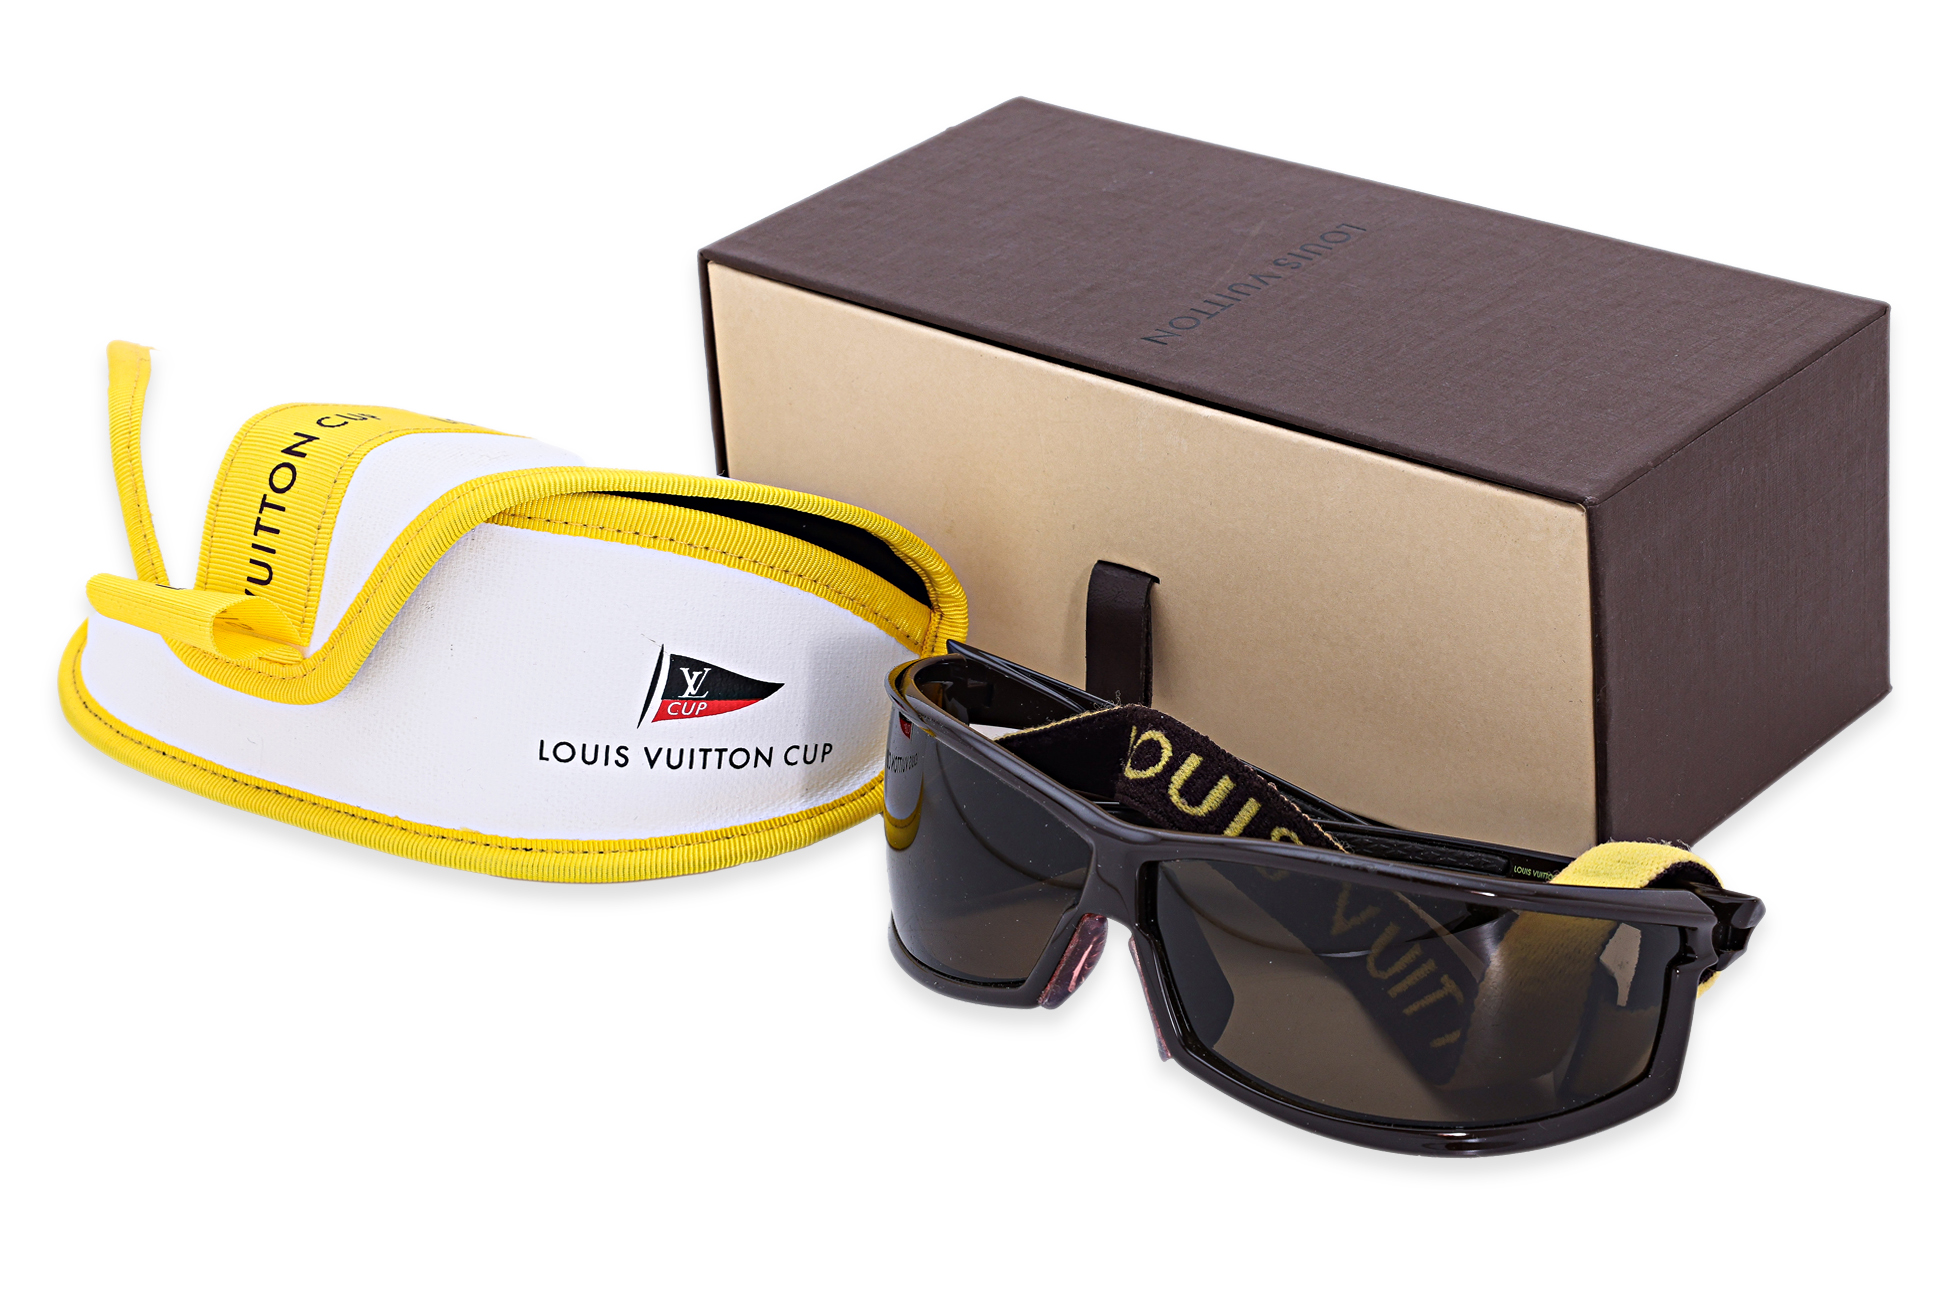 A PAIR OF LOUIS VUITTON CUP SUNGLASSES